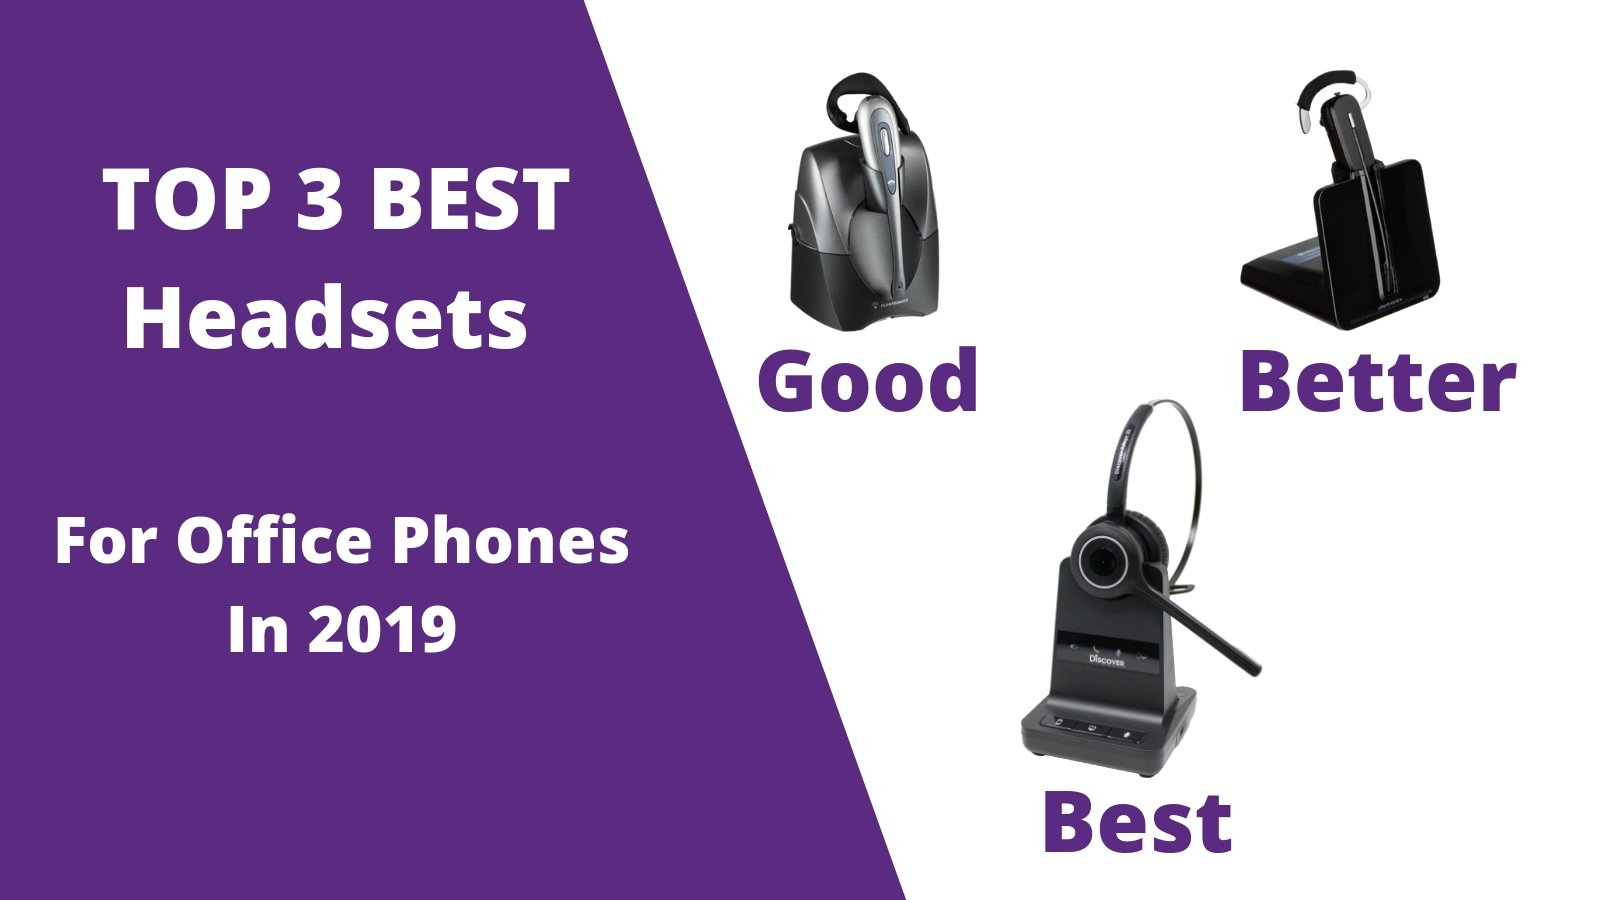 Top 3 Best Wireless Headsets For Business Phones in 2021 - Headset Advisor